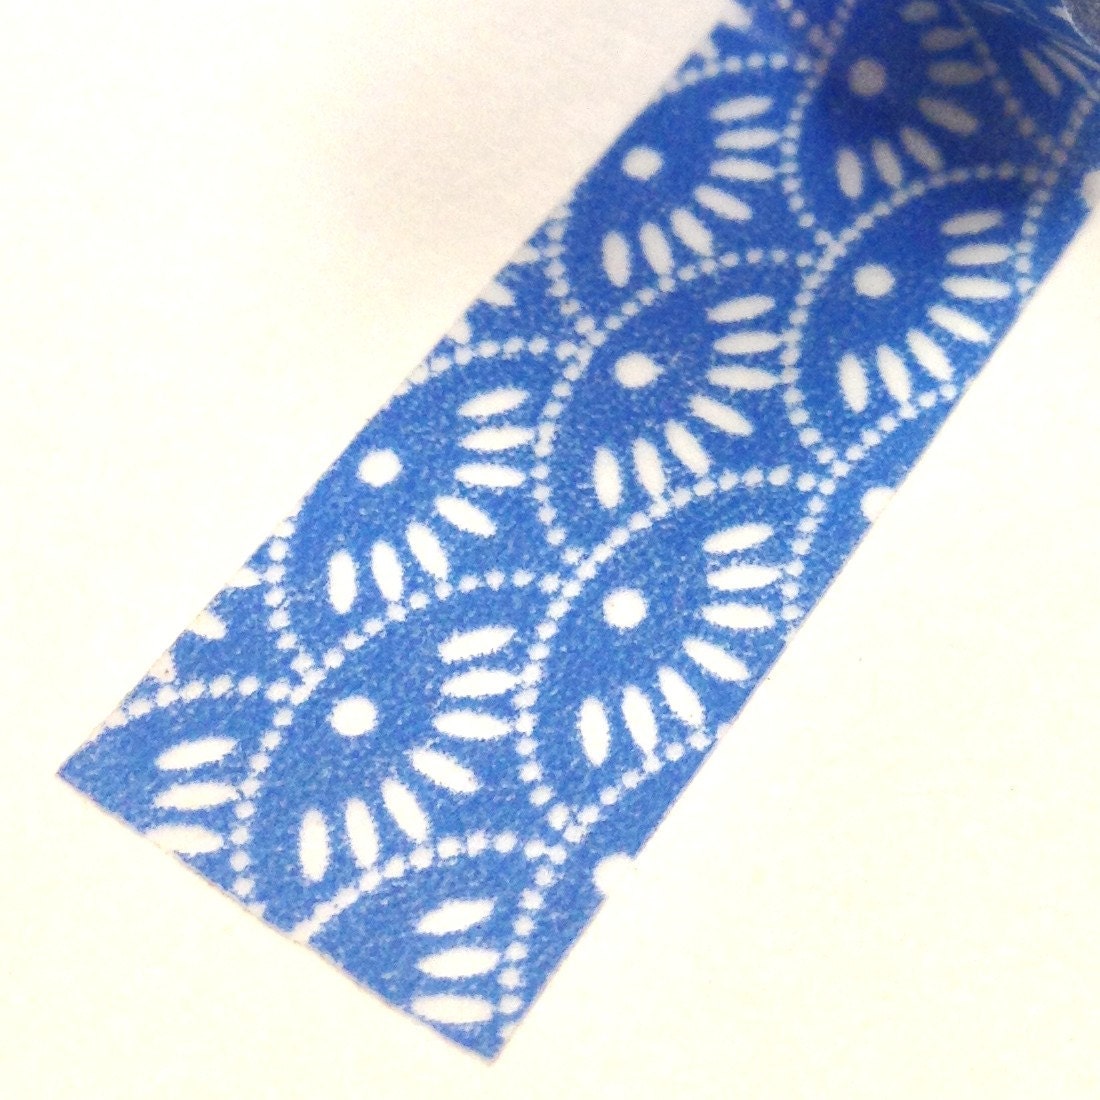 Washi Tape 15mm White Dots and Dashes on Blue Deco Paper - Etsy